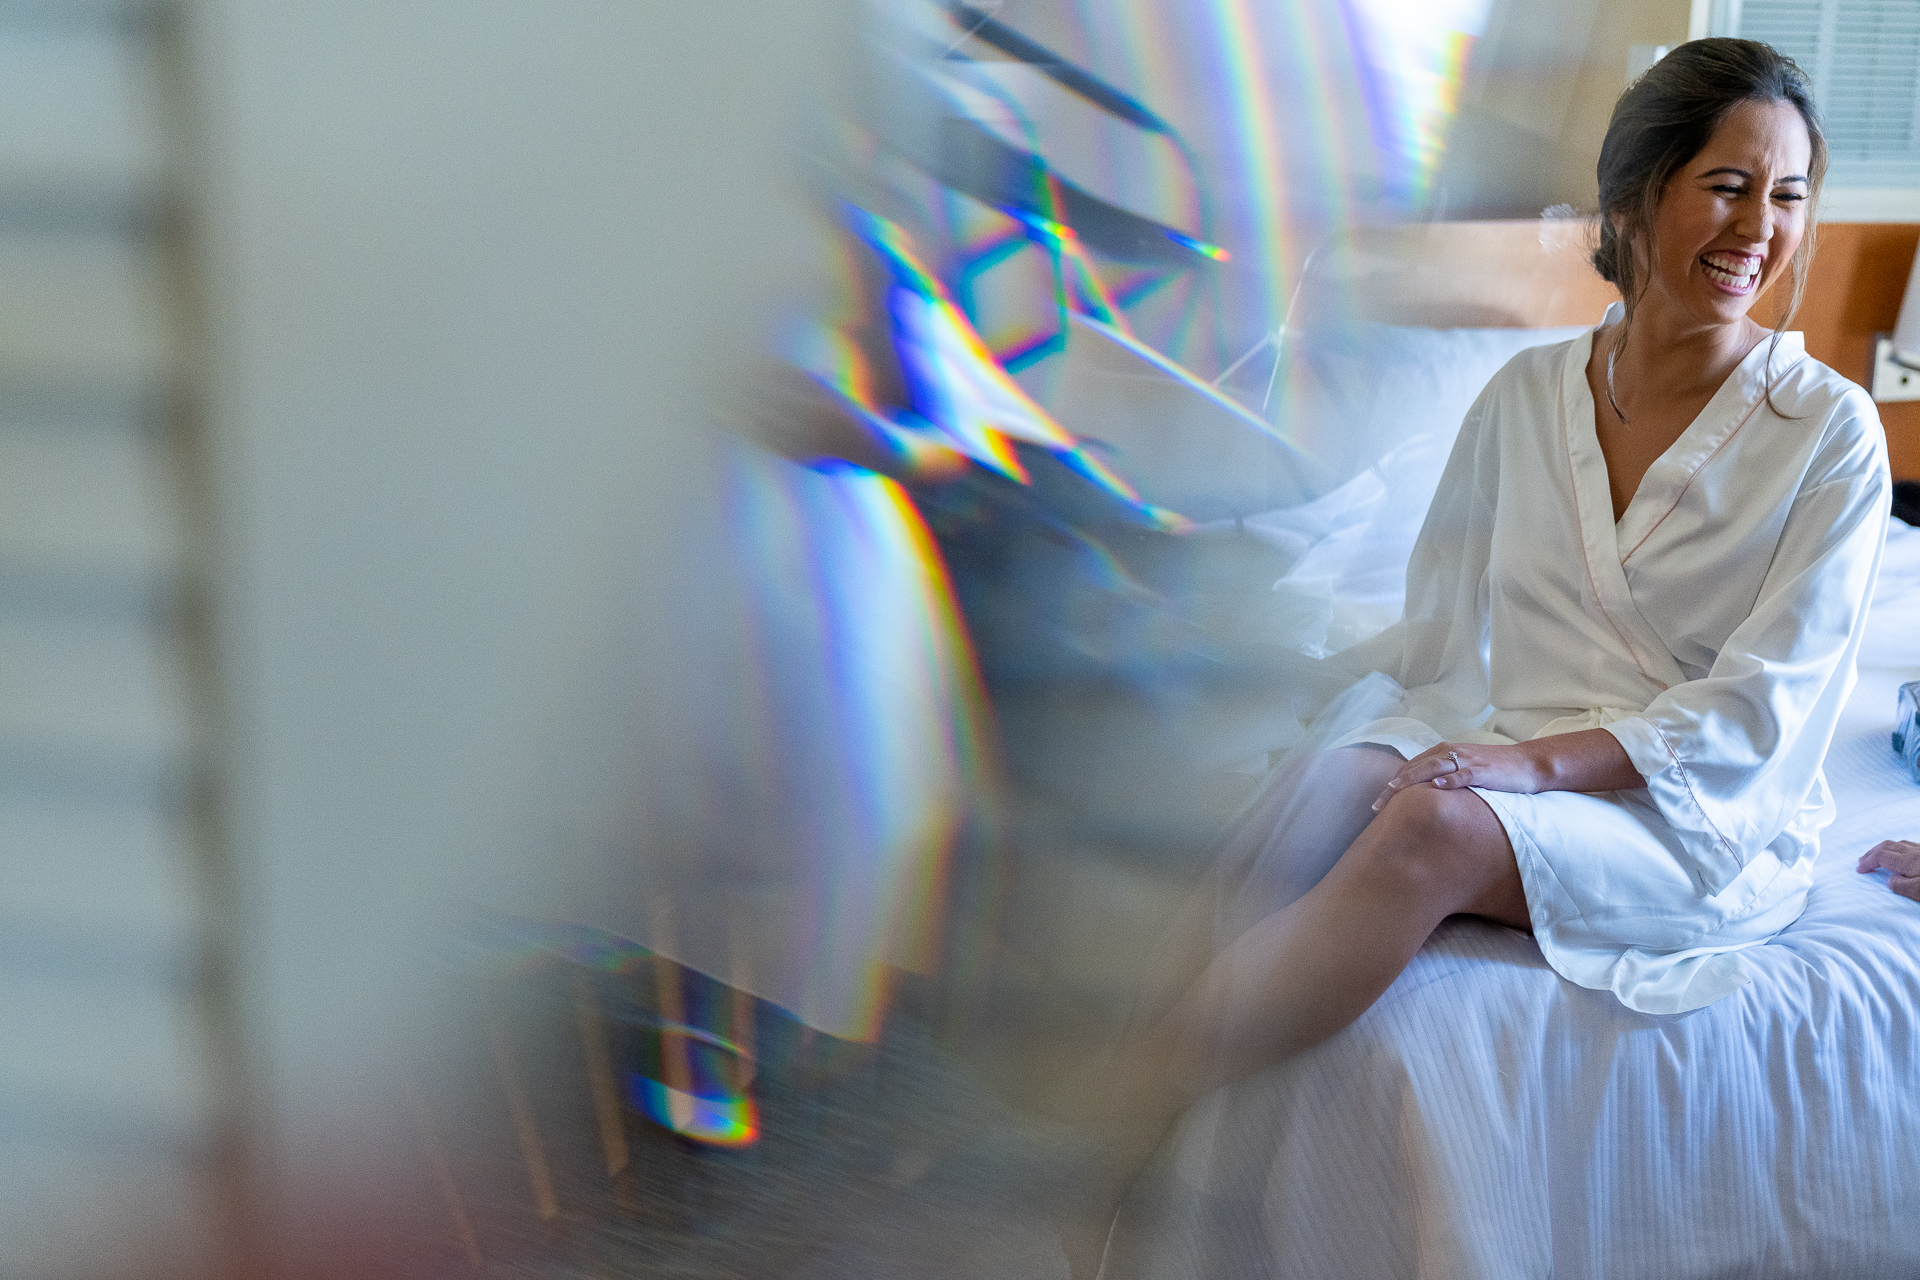 A woman in a white robe sitting on a bed, captured by wedding photographer Thomas Kim.